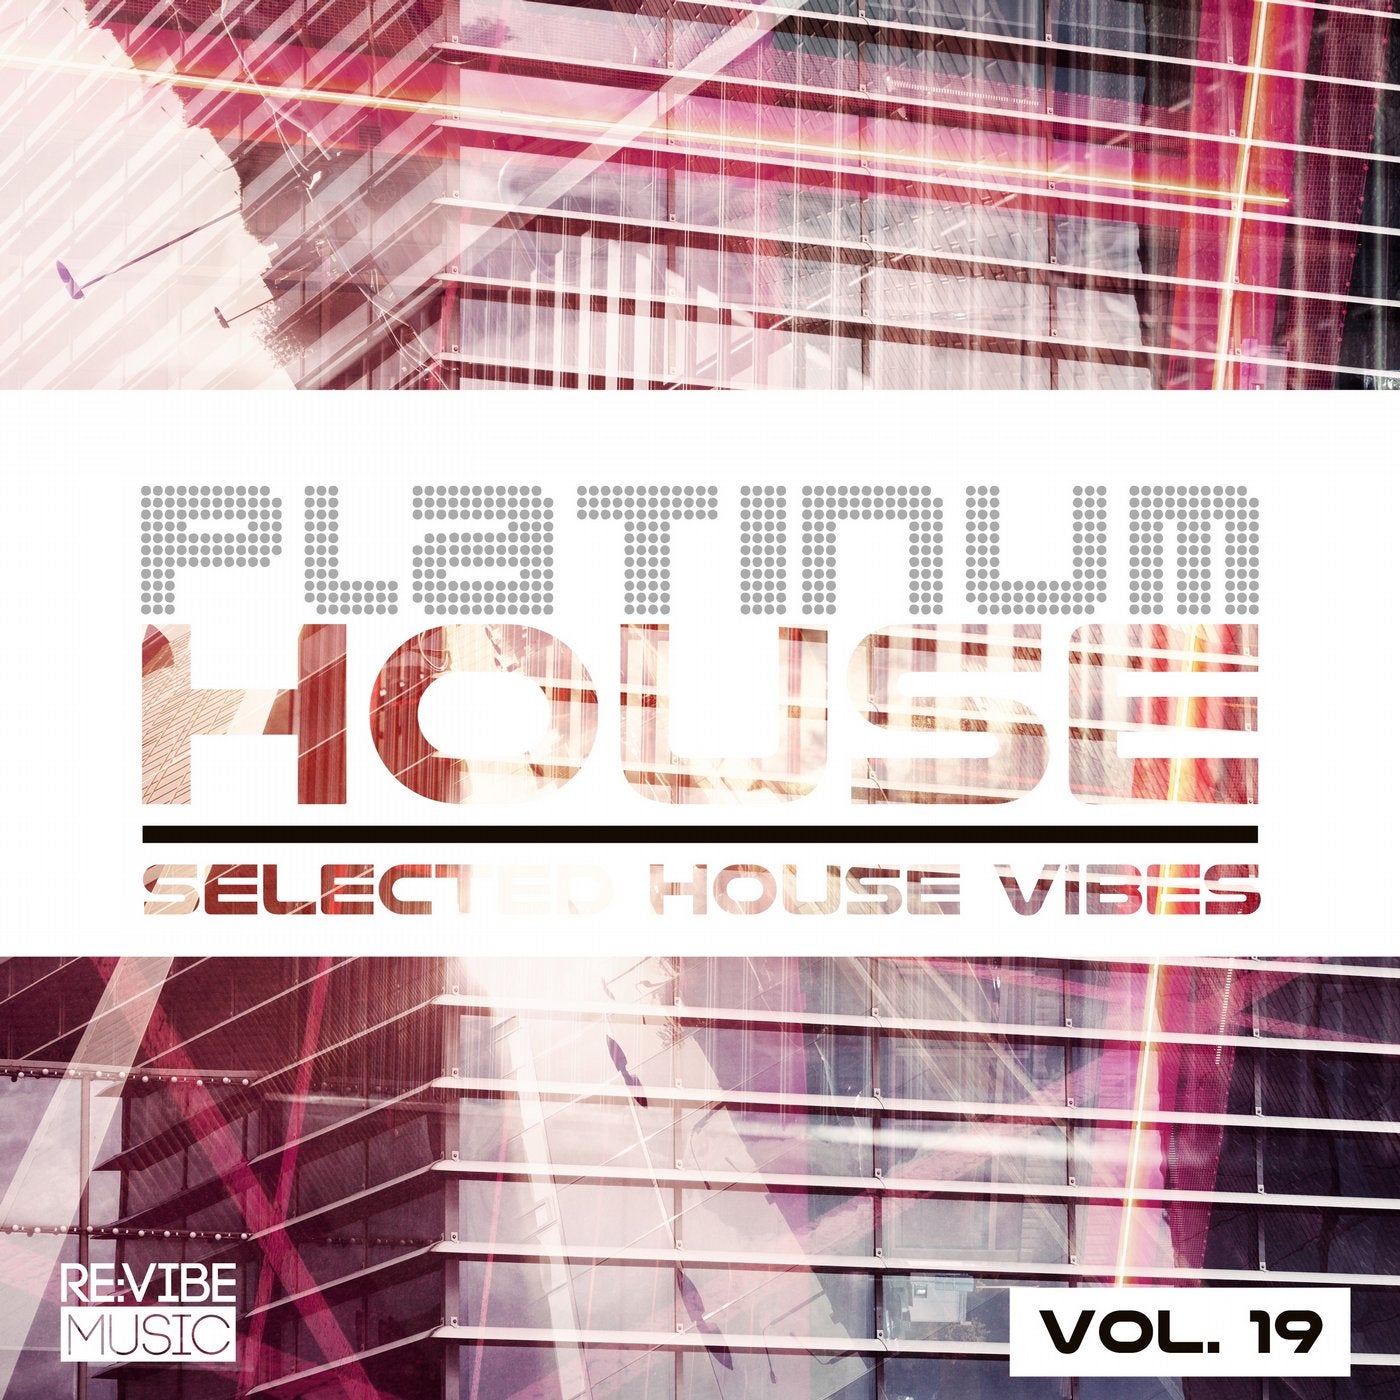 Platinum House - Selected House Vibes, Vol. 19